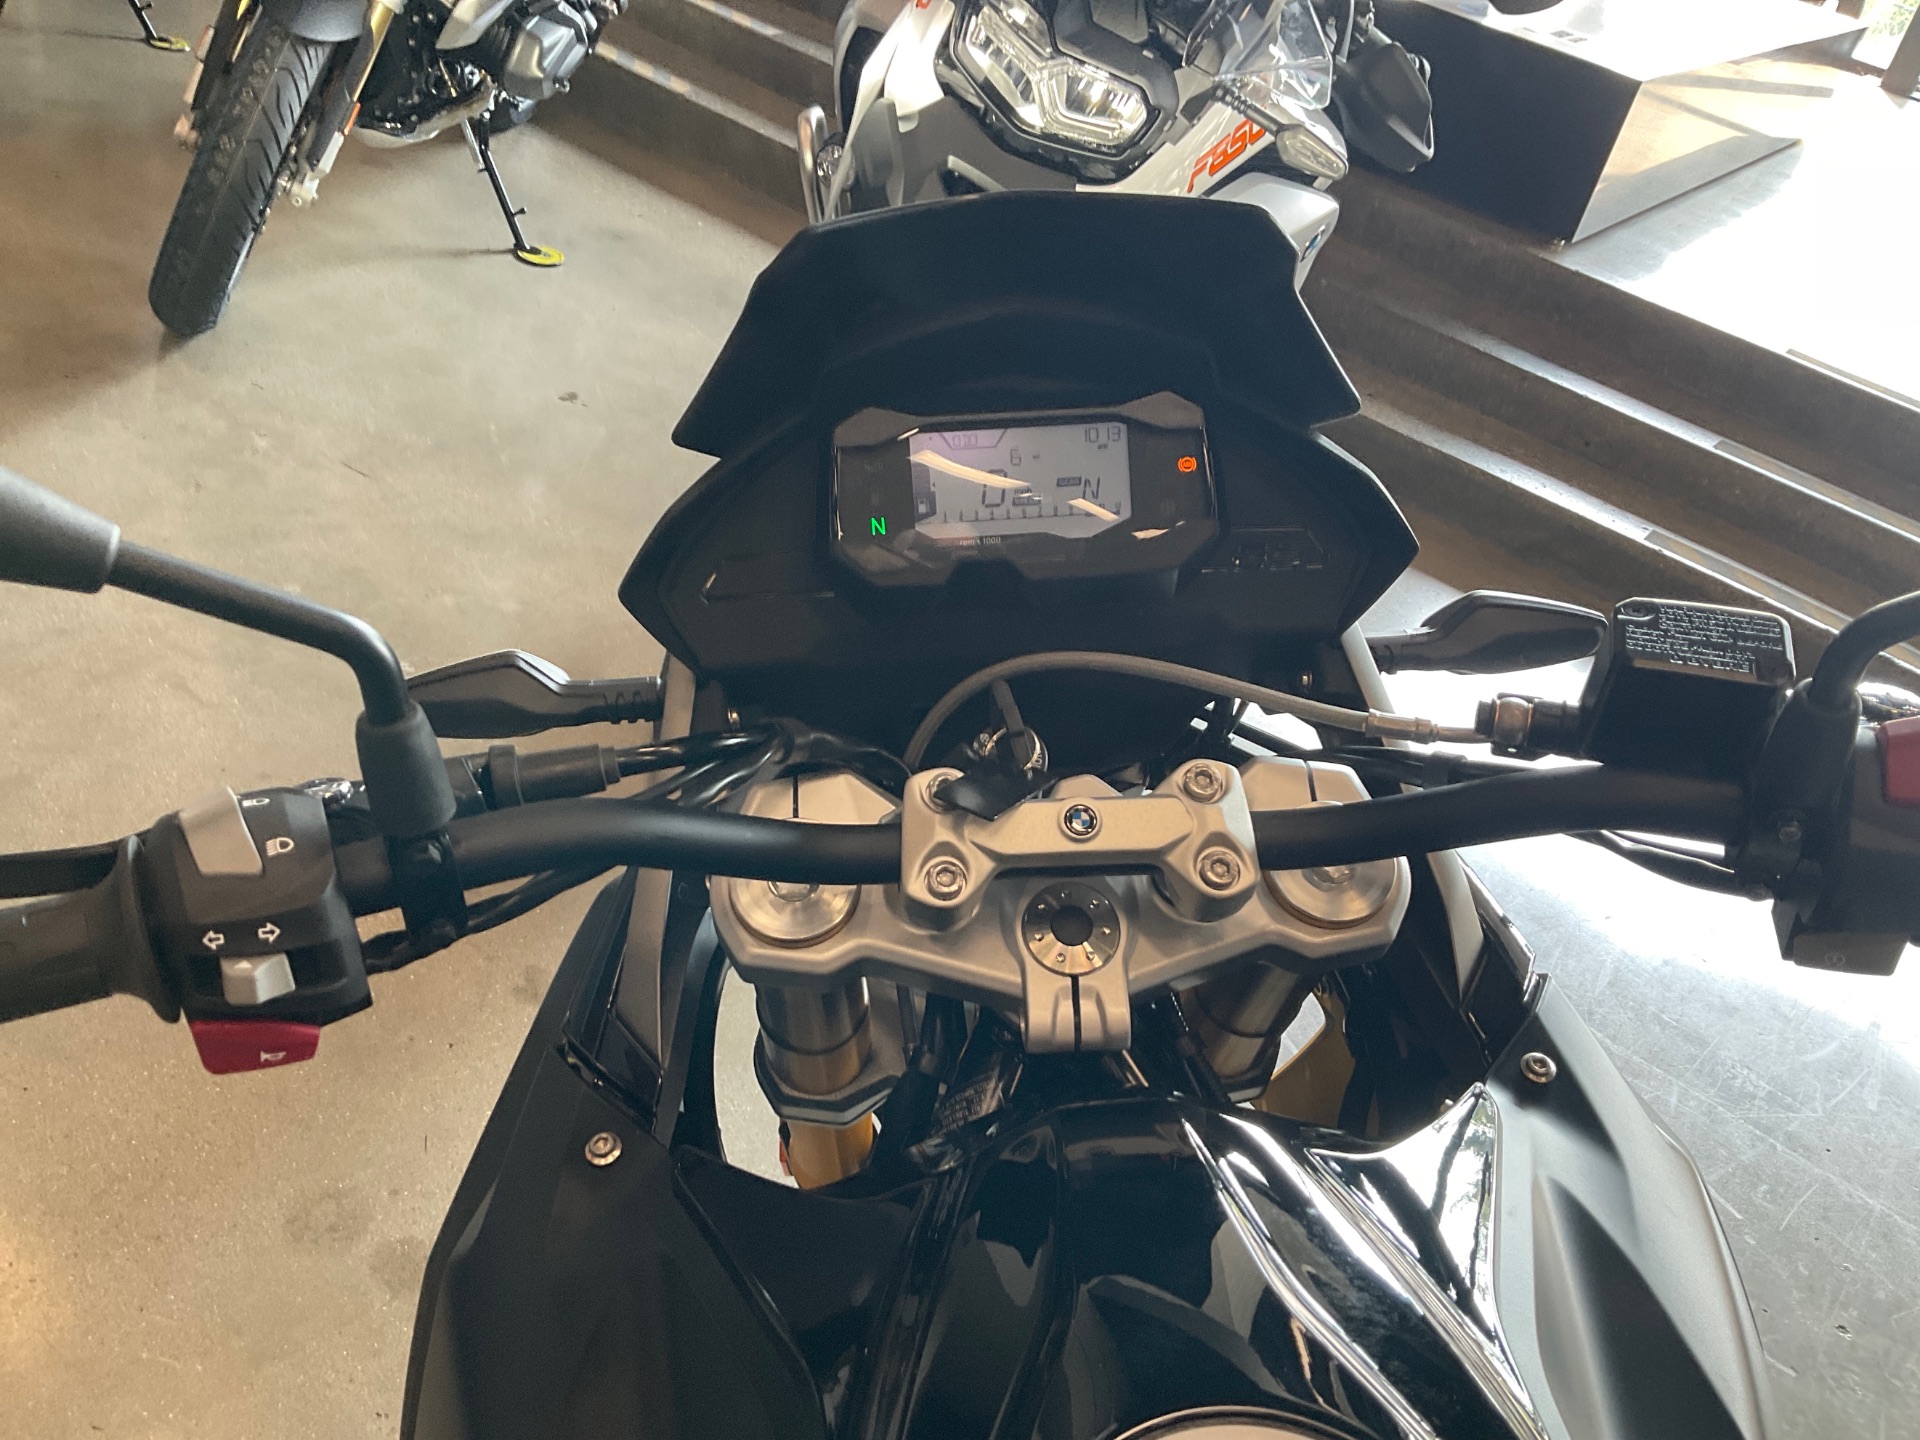 2023 BMW G 310 GS in Middletown, Ohio - Photo 3